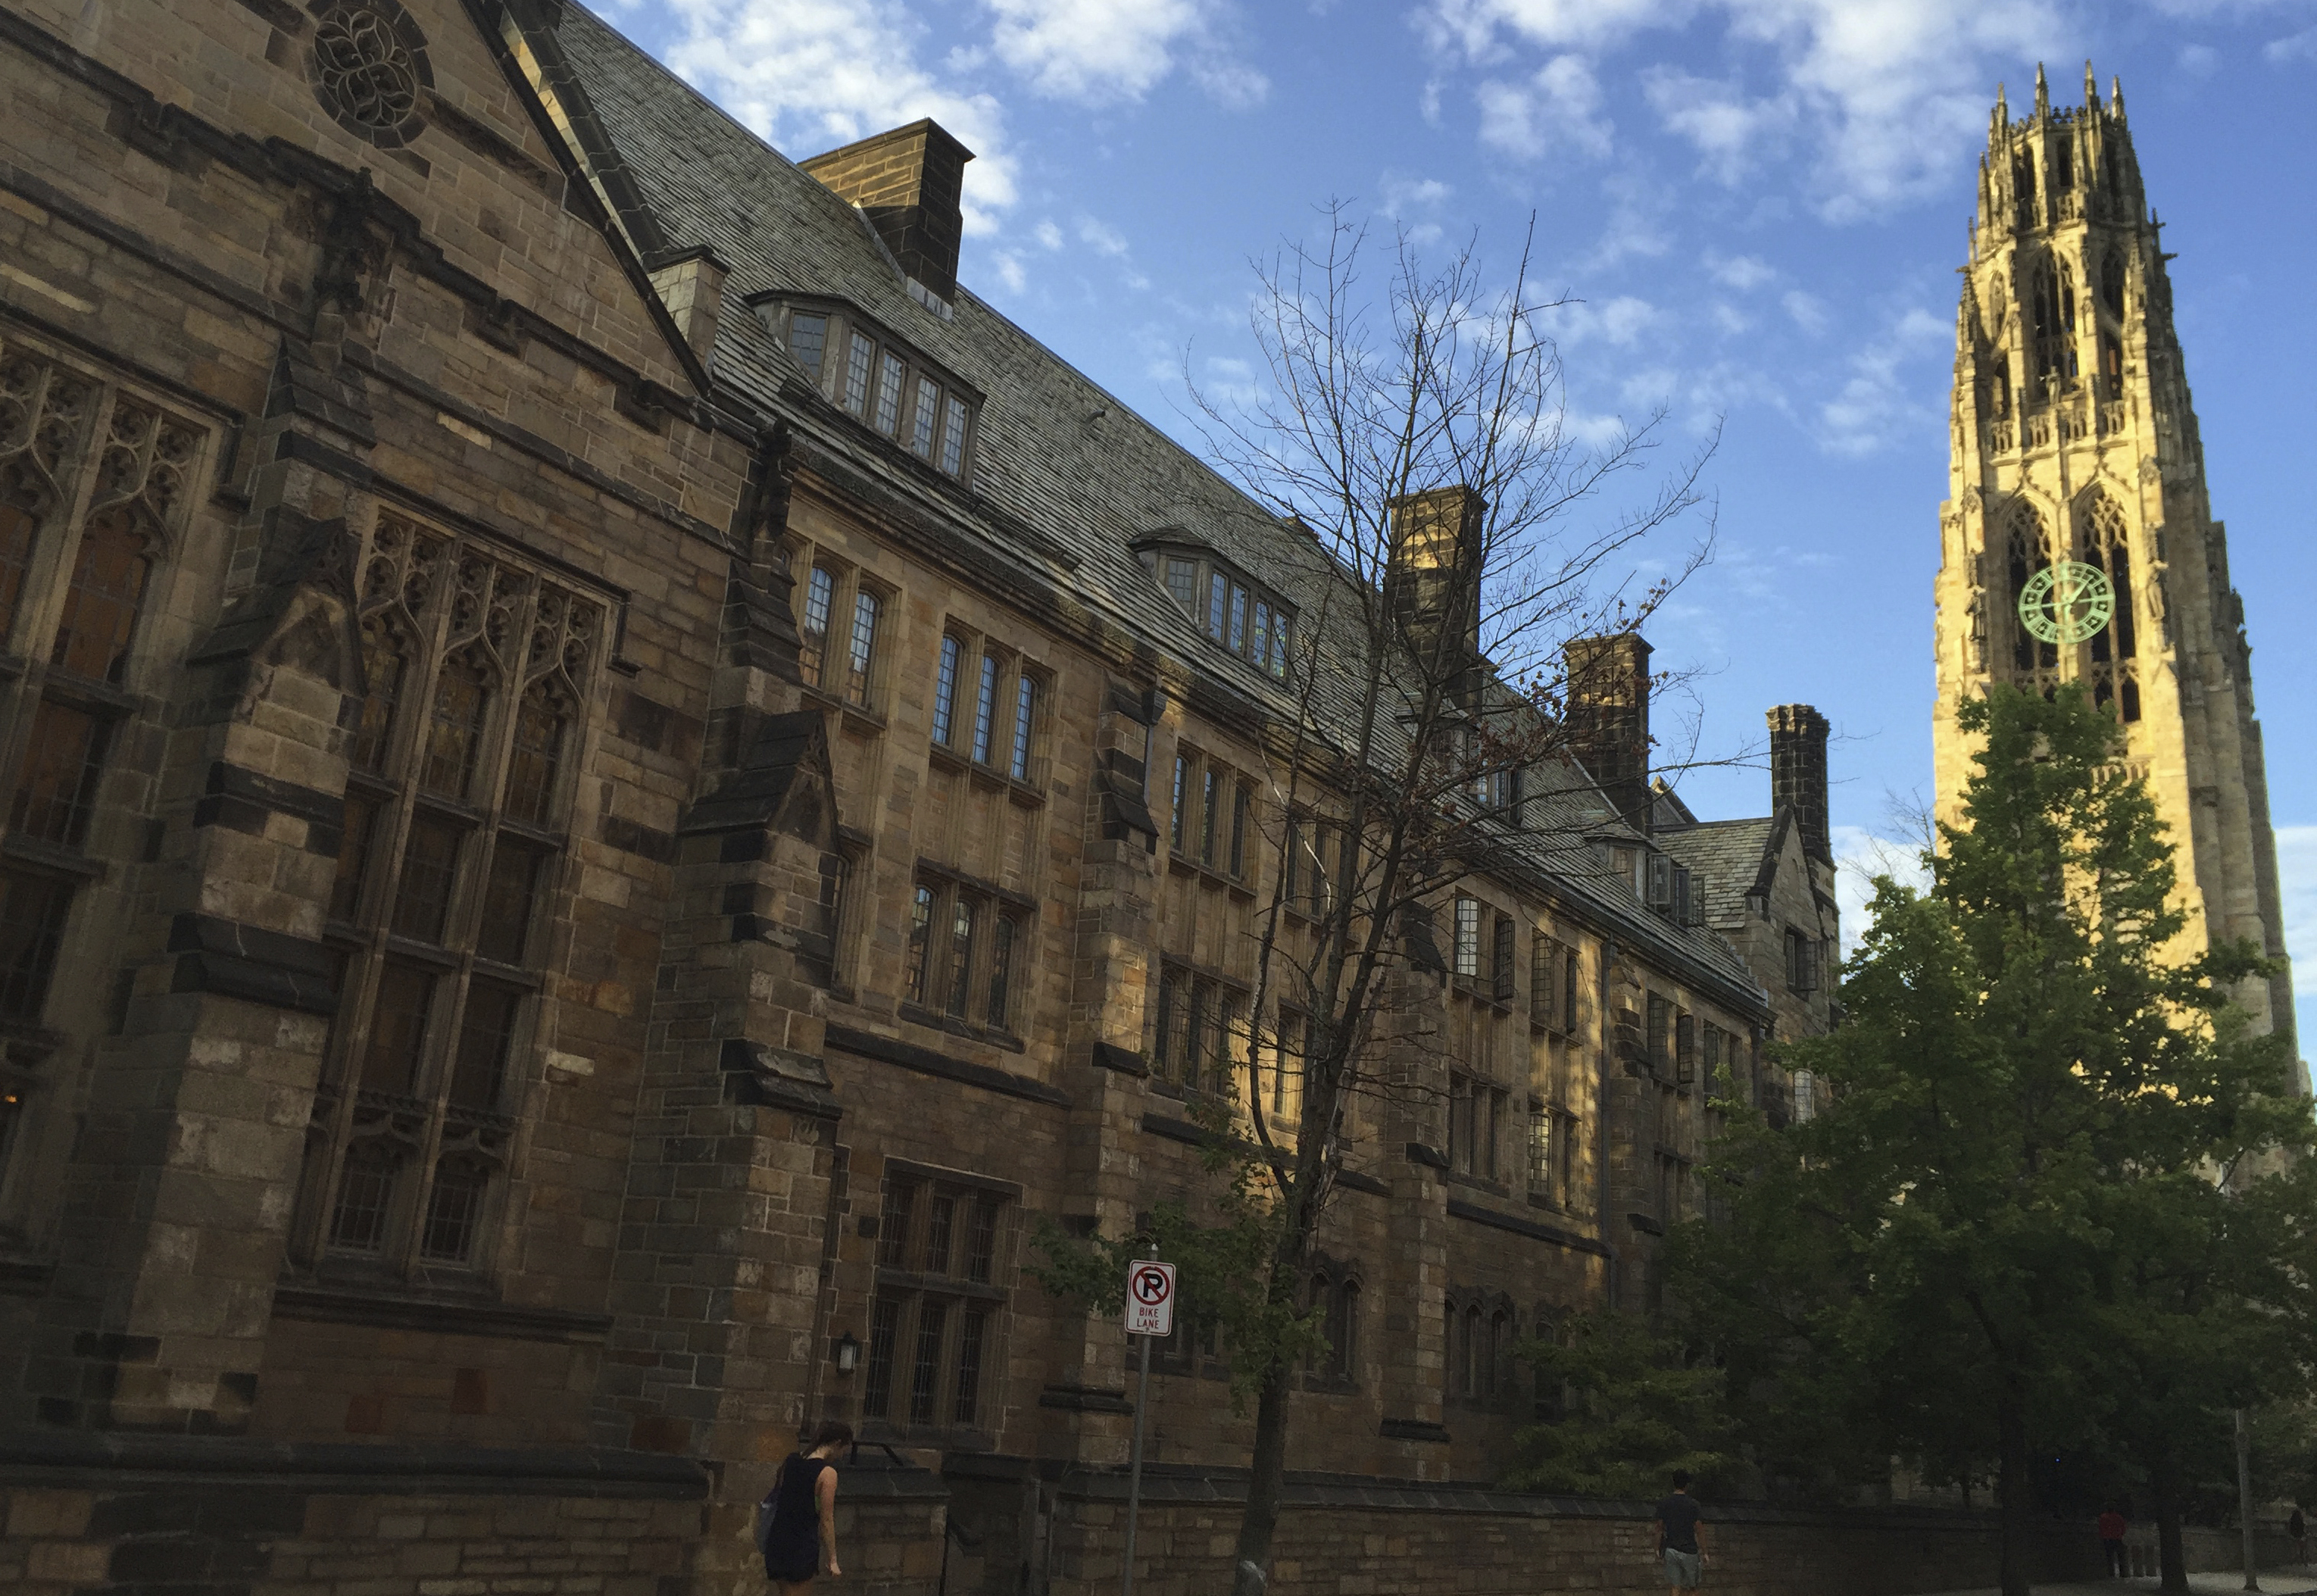 Yale's Skull and Bones warns students of pranks by impostor 